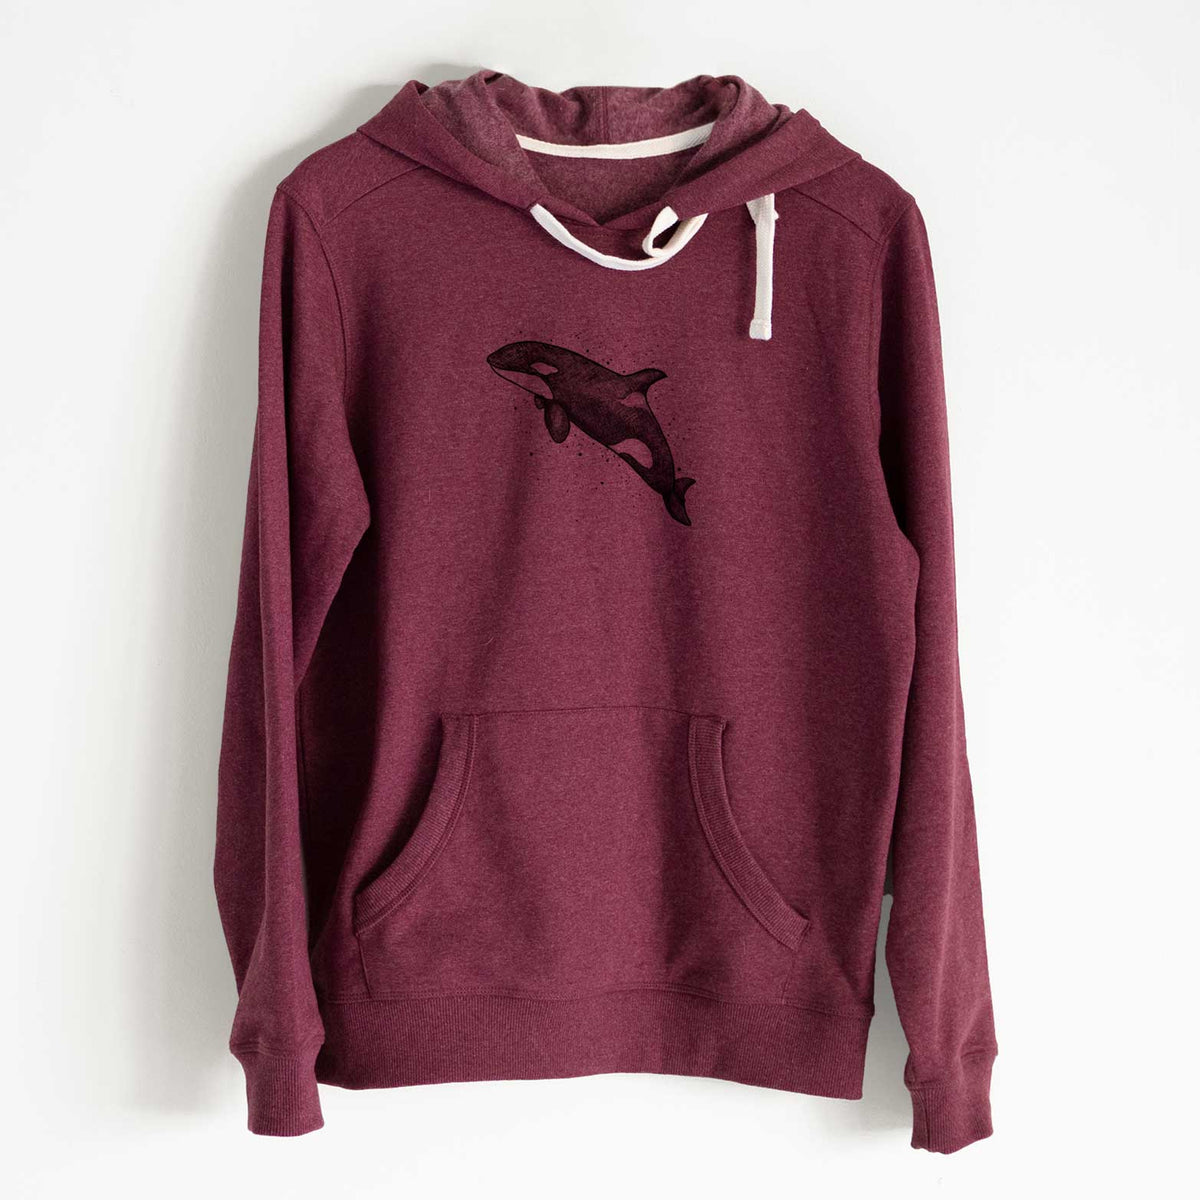 Orca Whale - Unisex Recycled Hoodie - CLOSEOUT - FINAL SALE